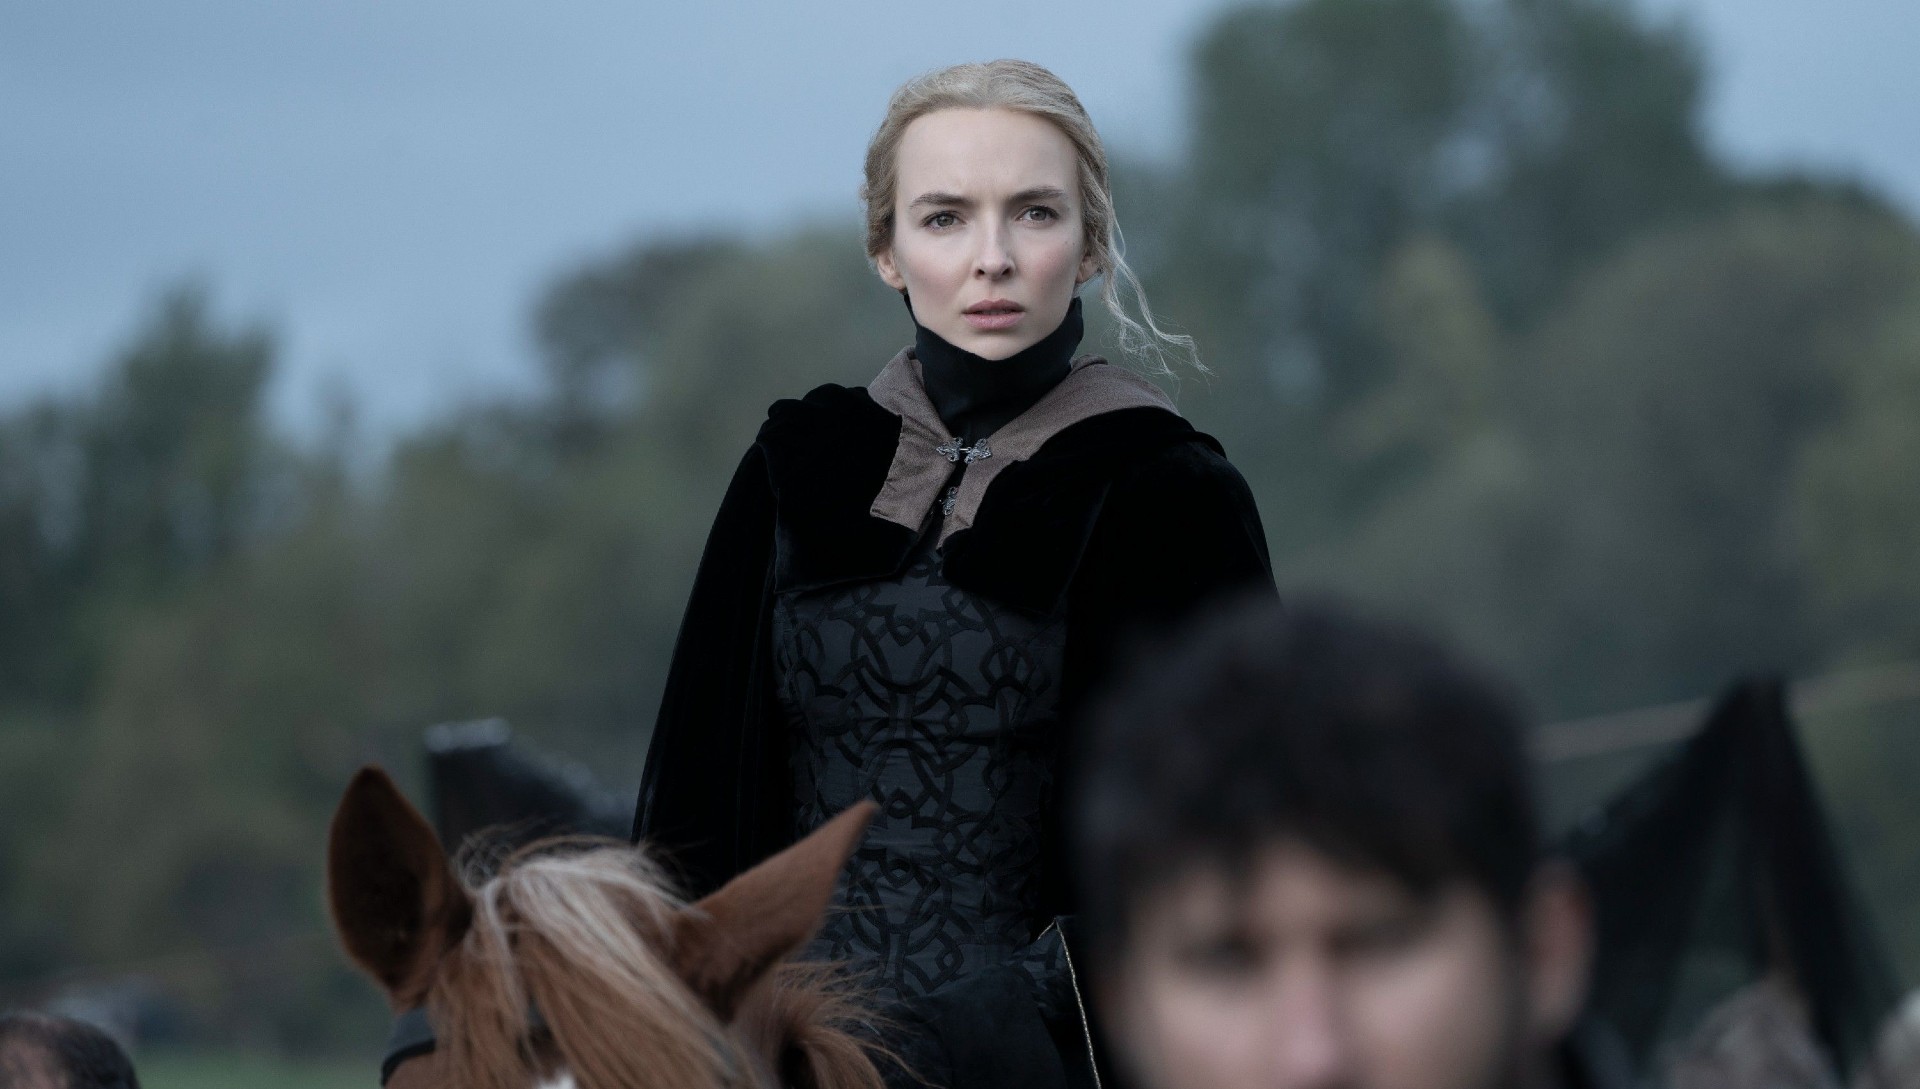 WATCH: Jodie Comer Raises the Stakes in First Trailer for Ridley Scott's 'The Last Duel'